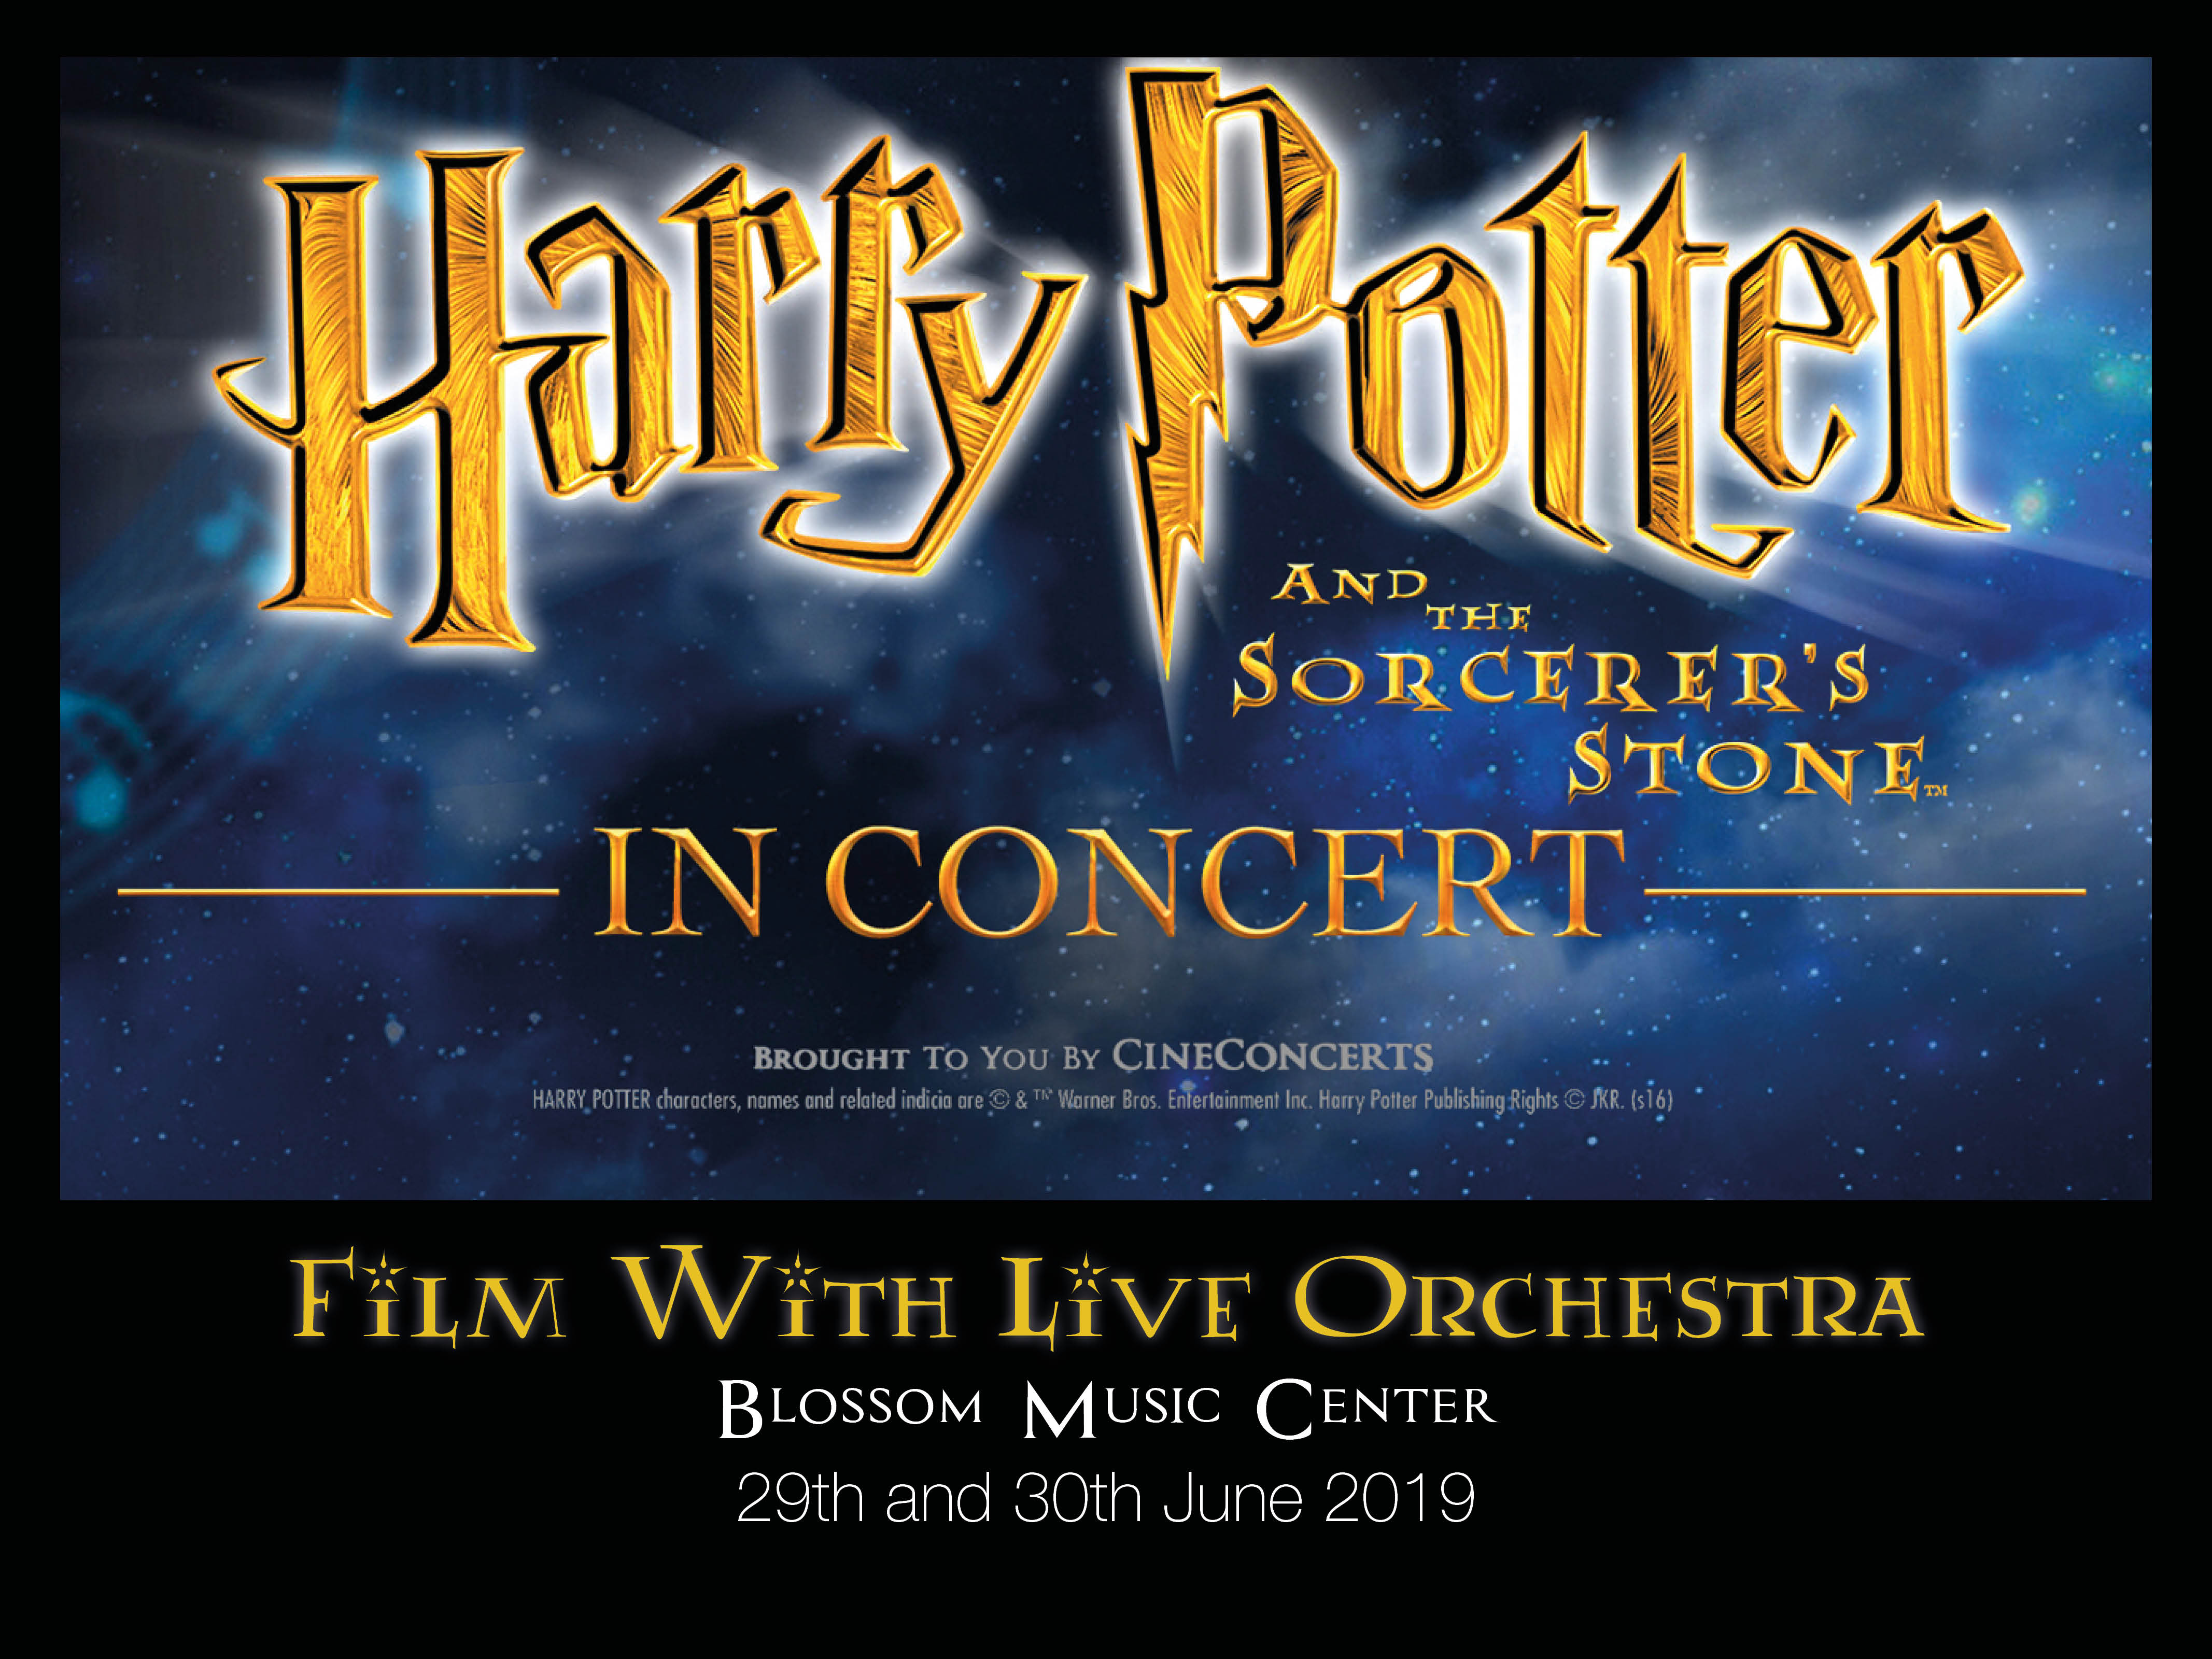 The Cleveland Orchestra: Justin Freer - Harry Potter and The Sorcerer's Stone - Film With Live Orchestra at Blossom Music Center